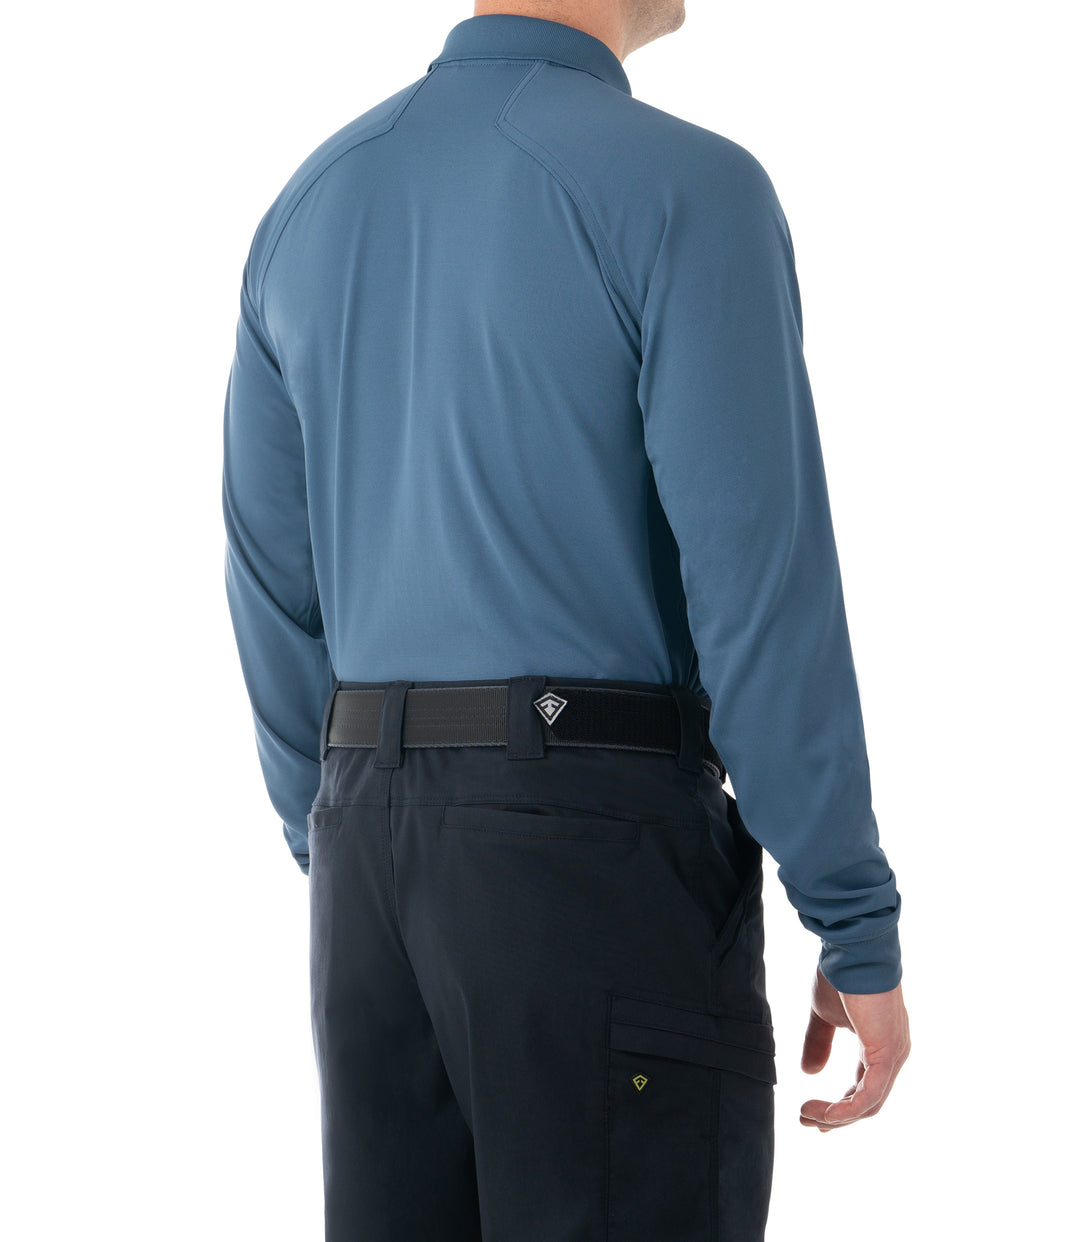 Men's Performance Long Sleeve Polo / French Blue